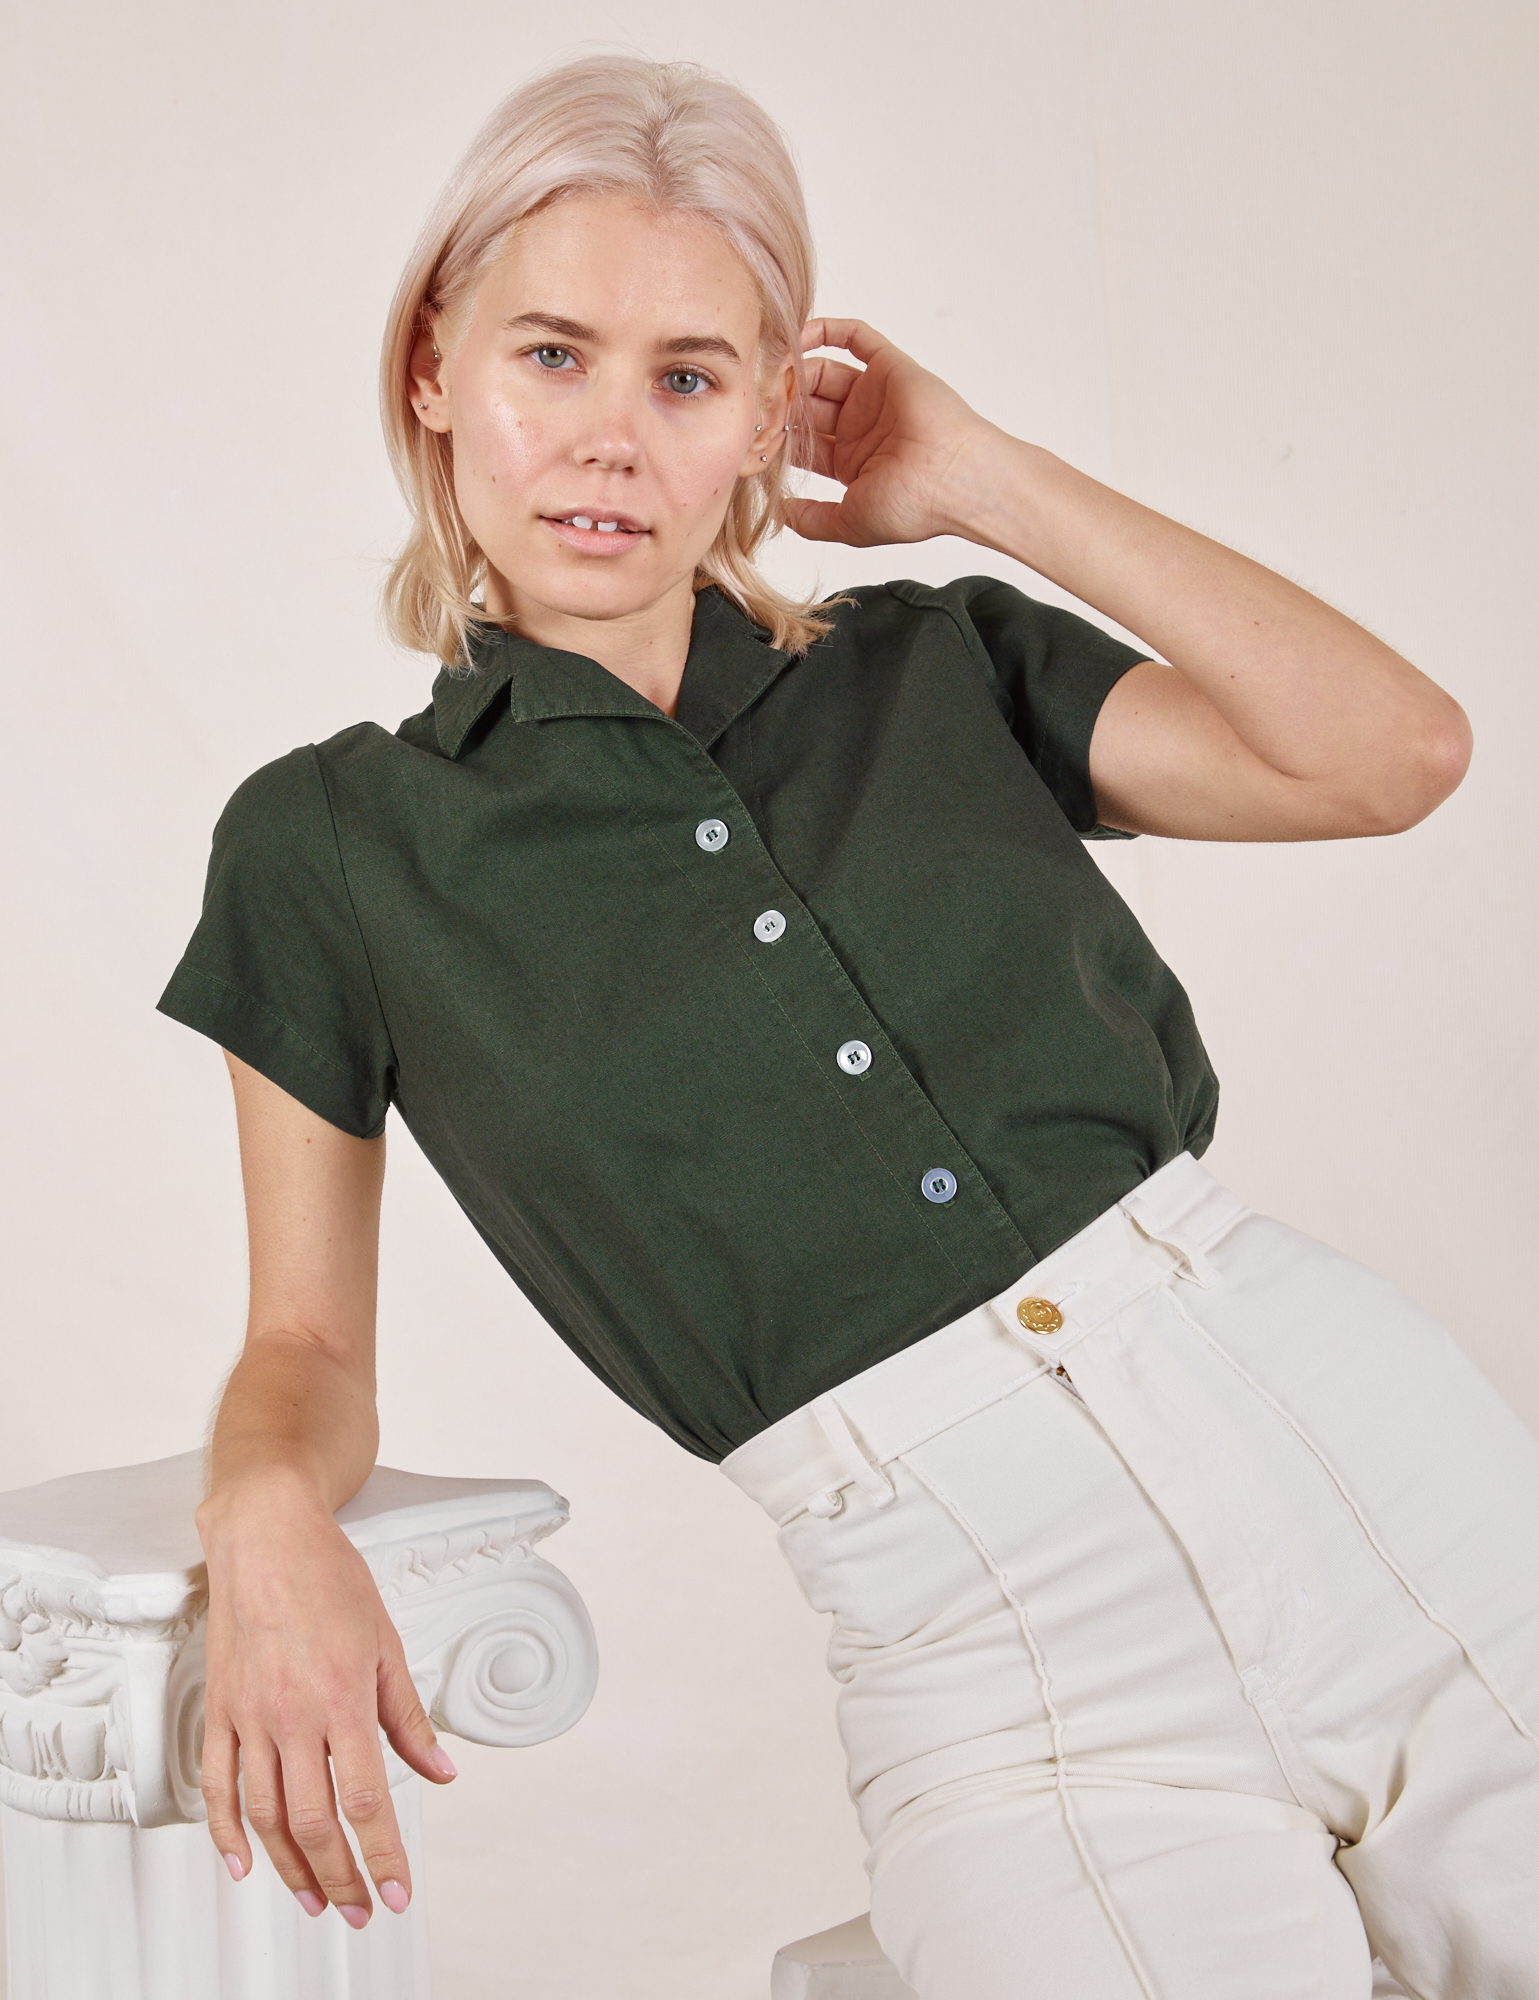 Madeline is wearing Pantry Button-Up in Swamp Green and vintage tee off-white Western Pants